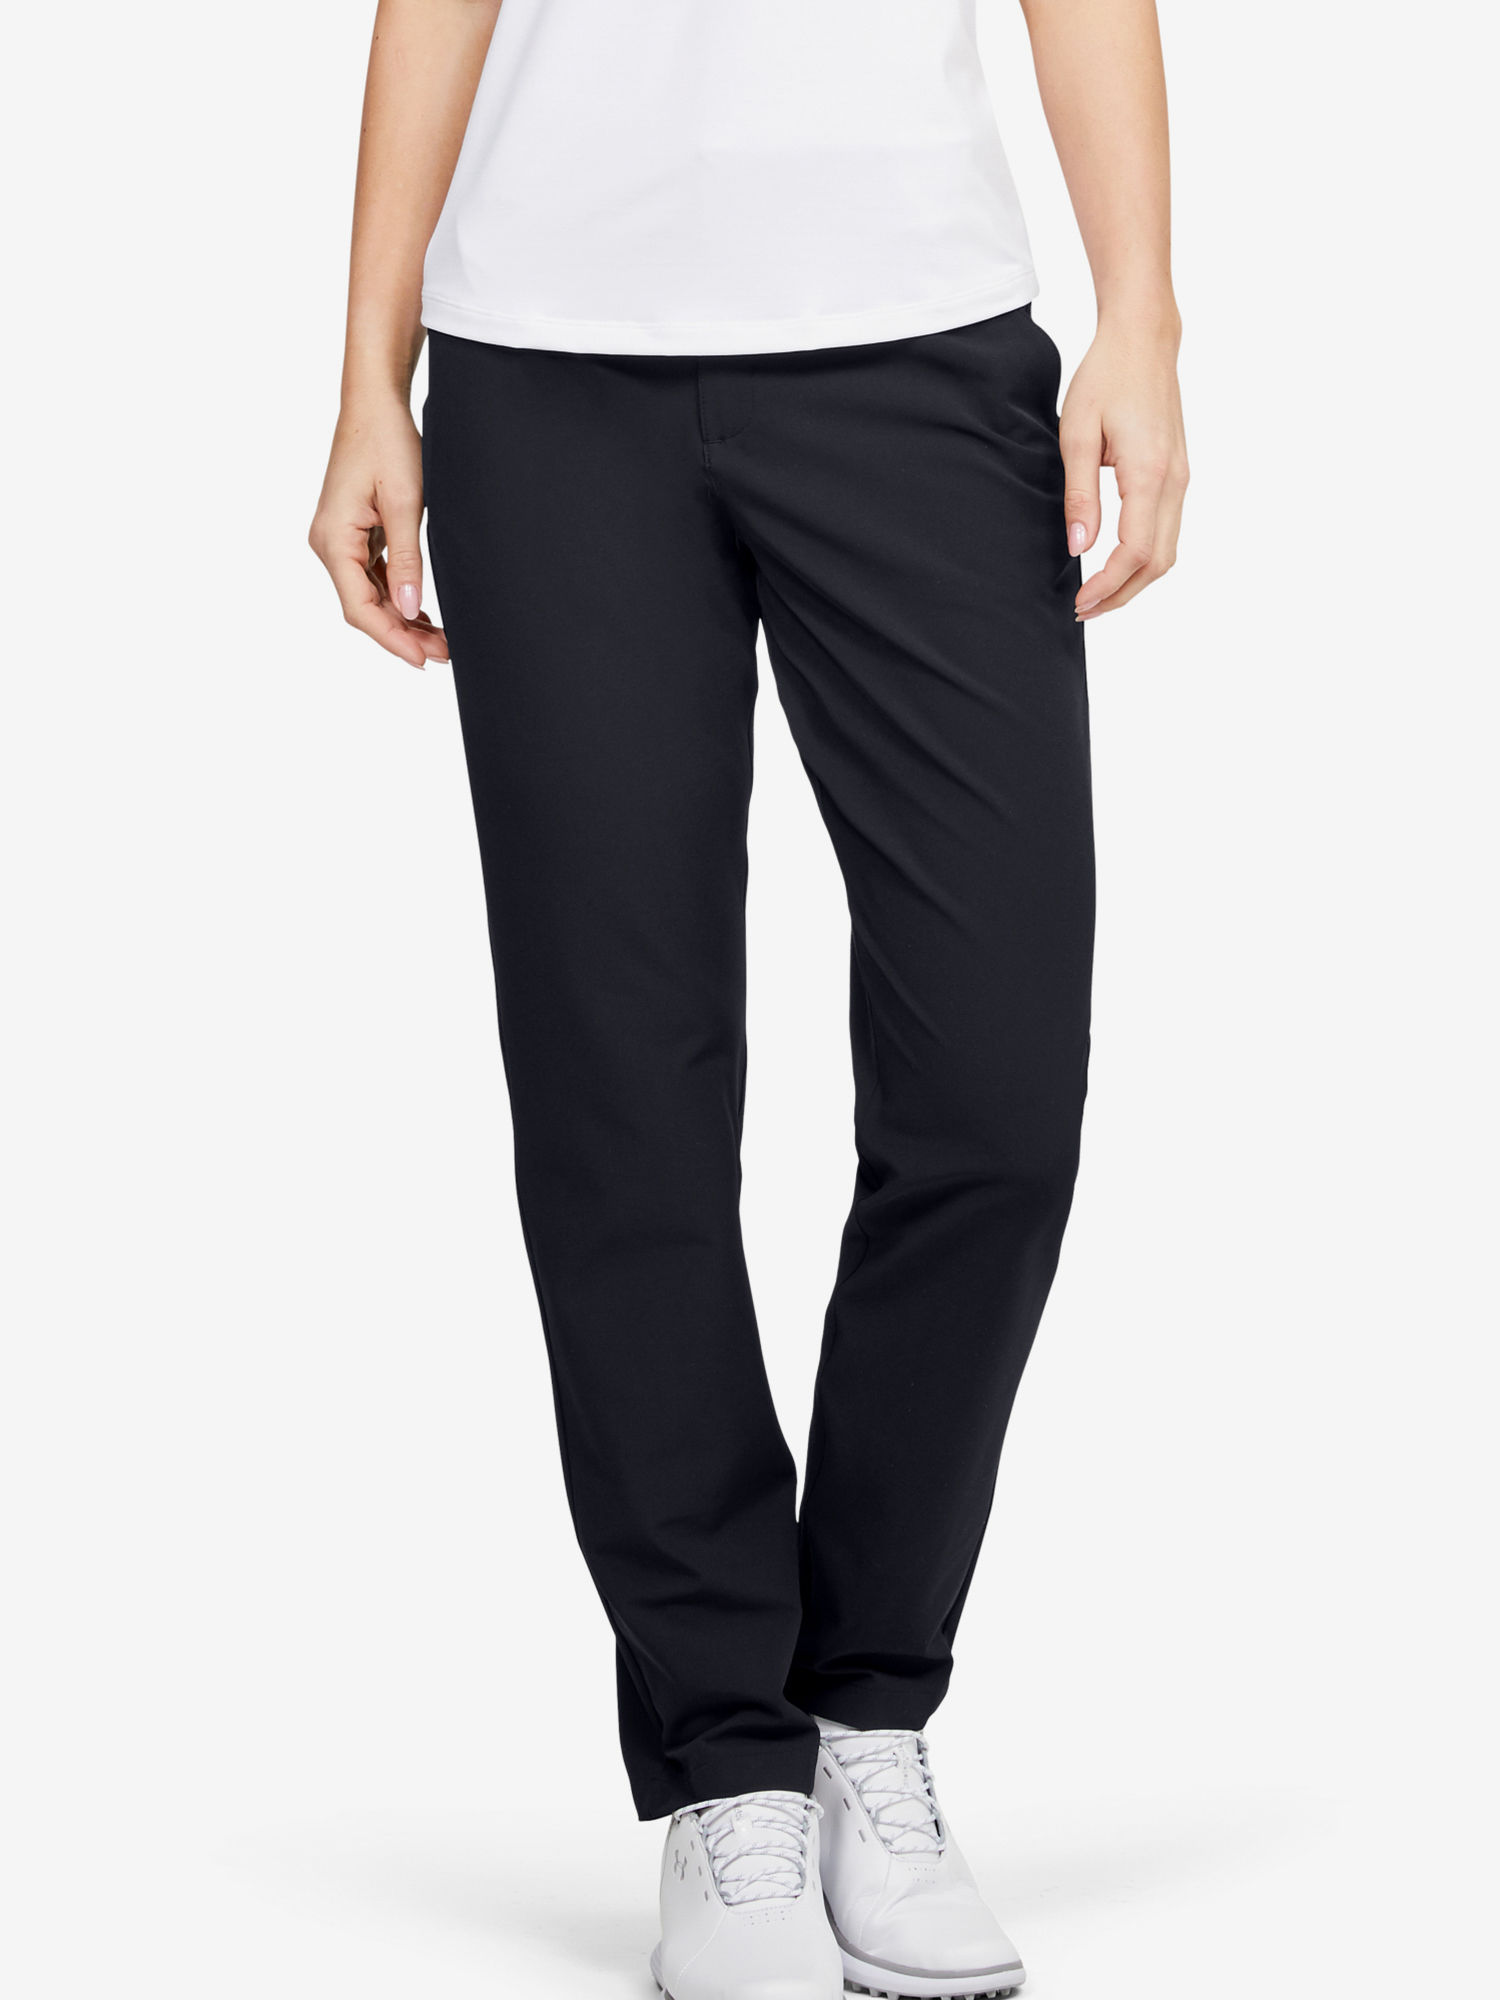 Kalhoty Under Armour Links Pant-BLK (1)